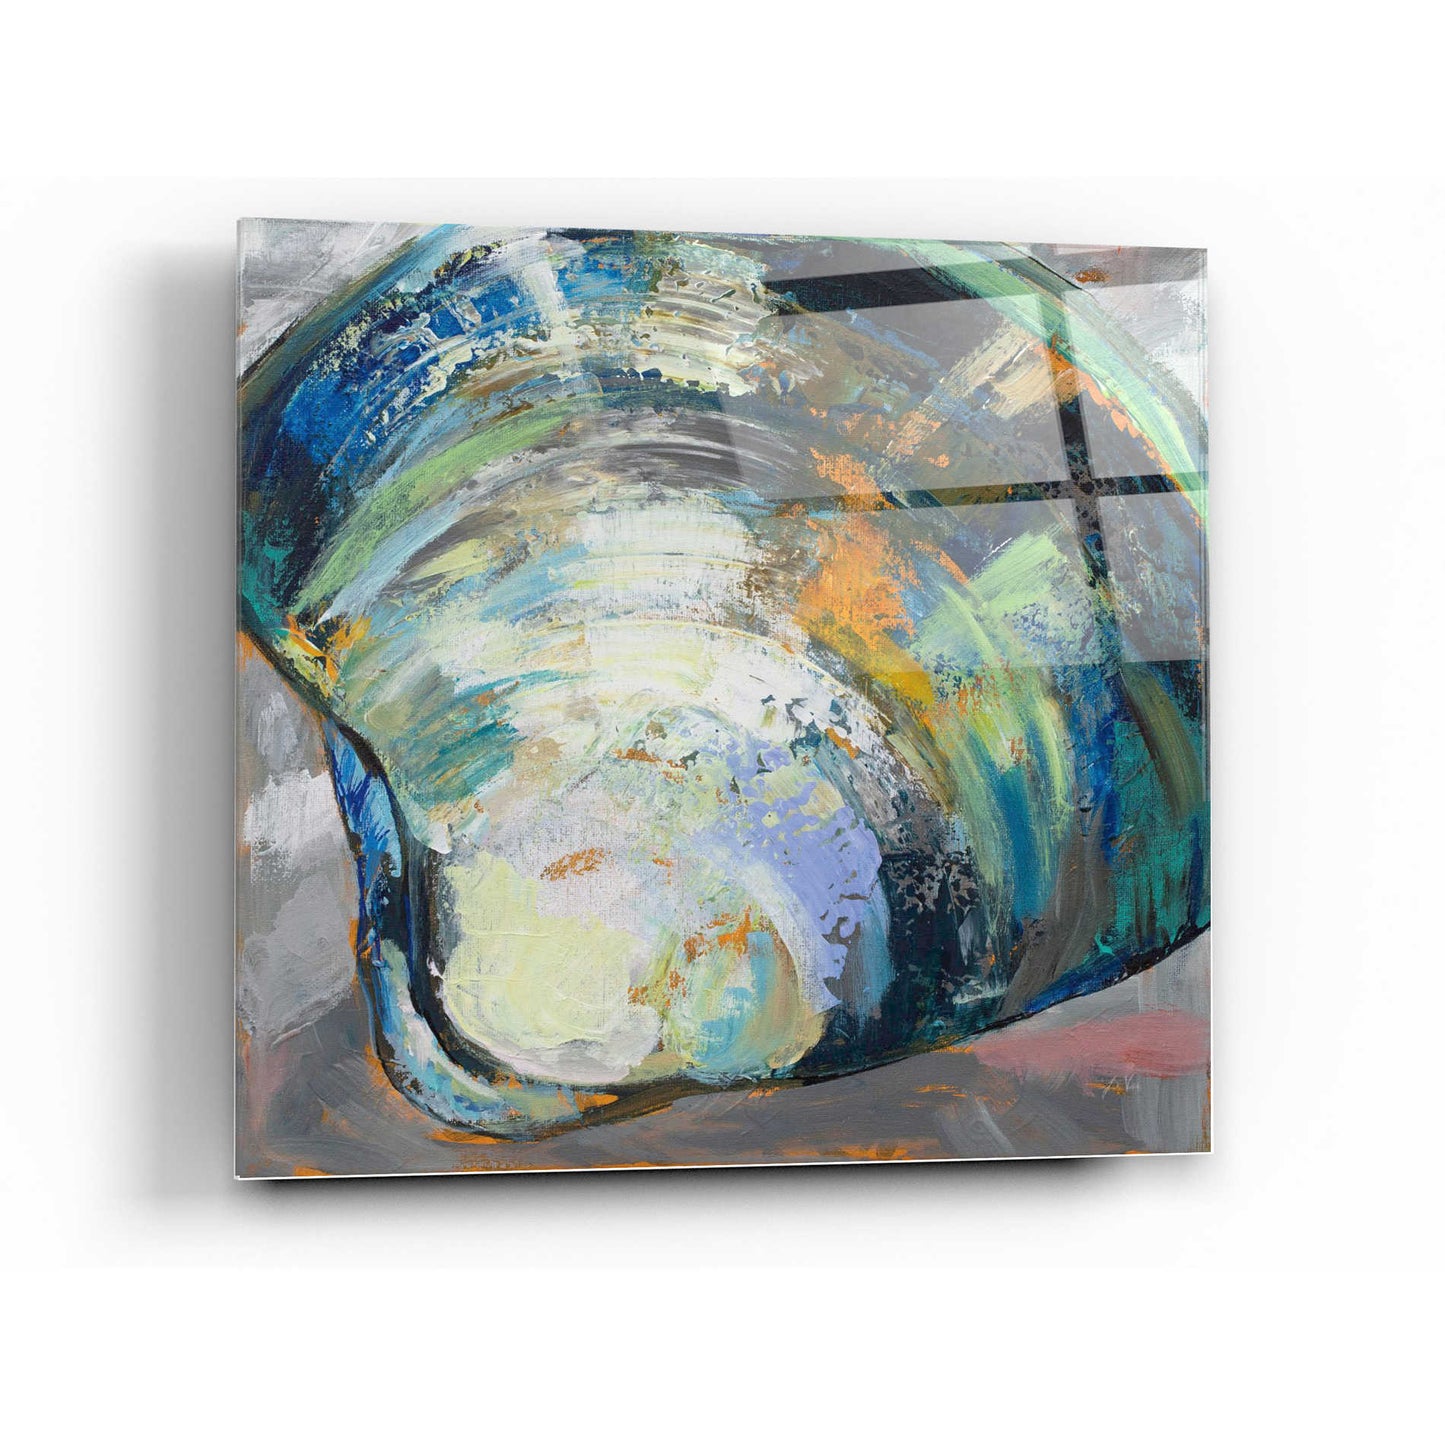 Epic Art 'Clamshell Two' by Jeanette Vertentes, Acrylic Glass Wall Art,12x12